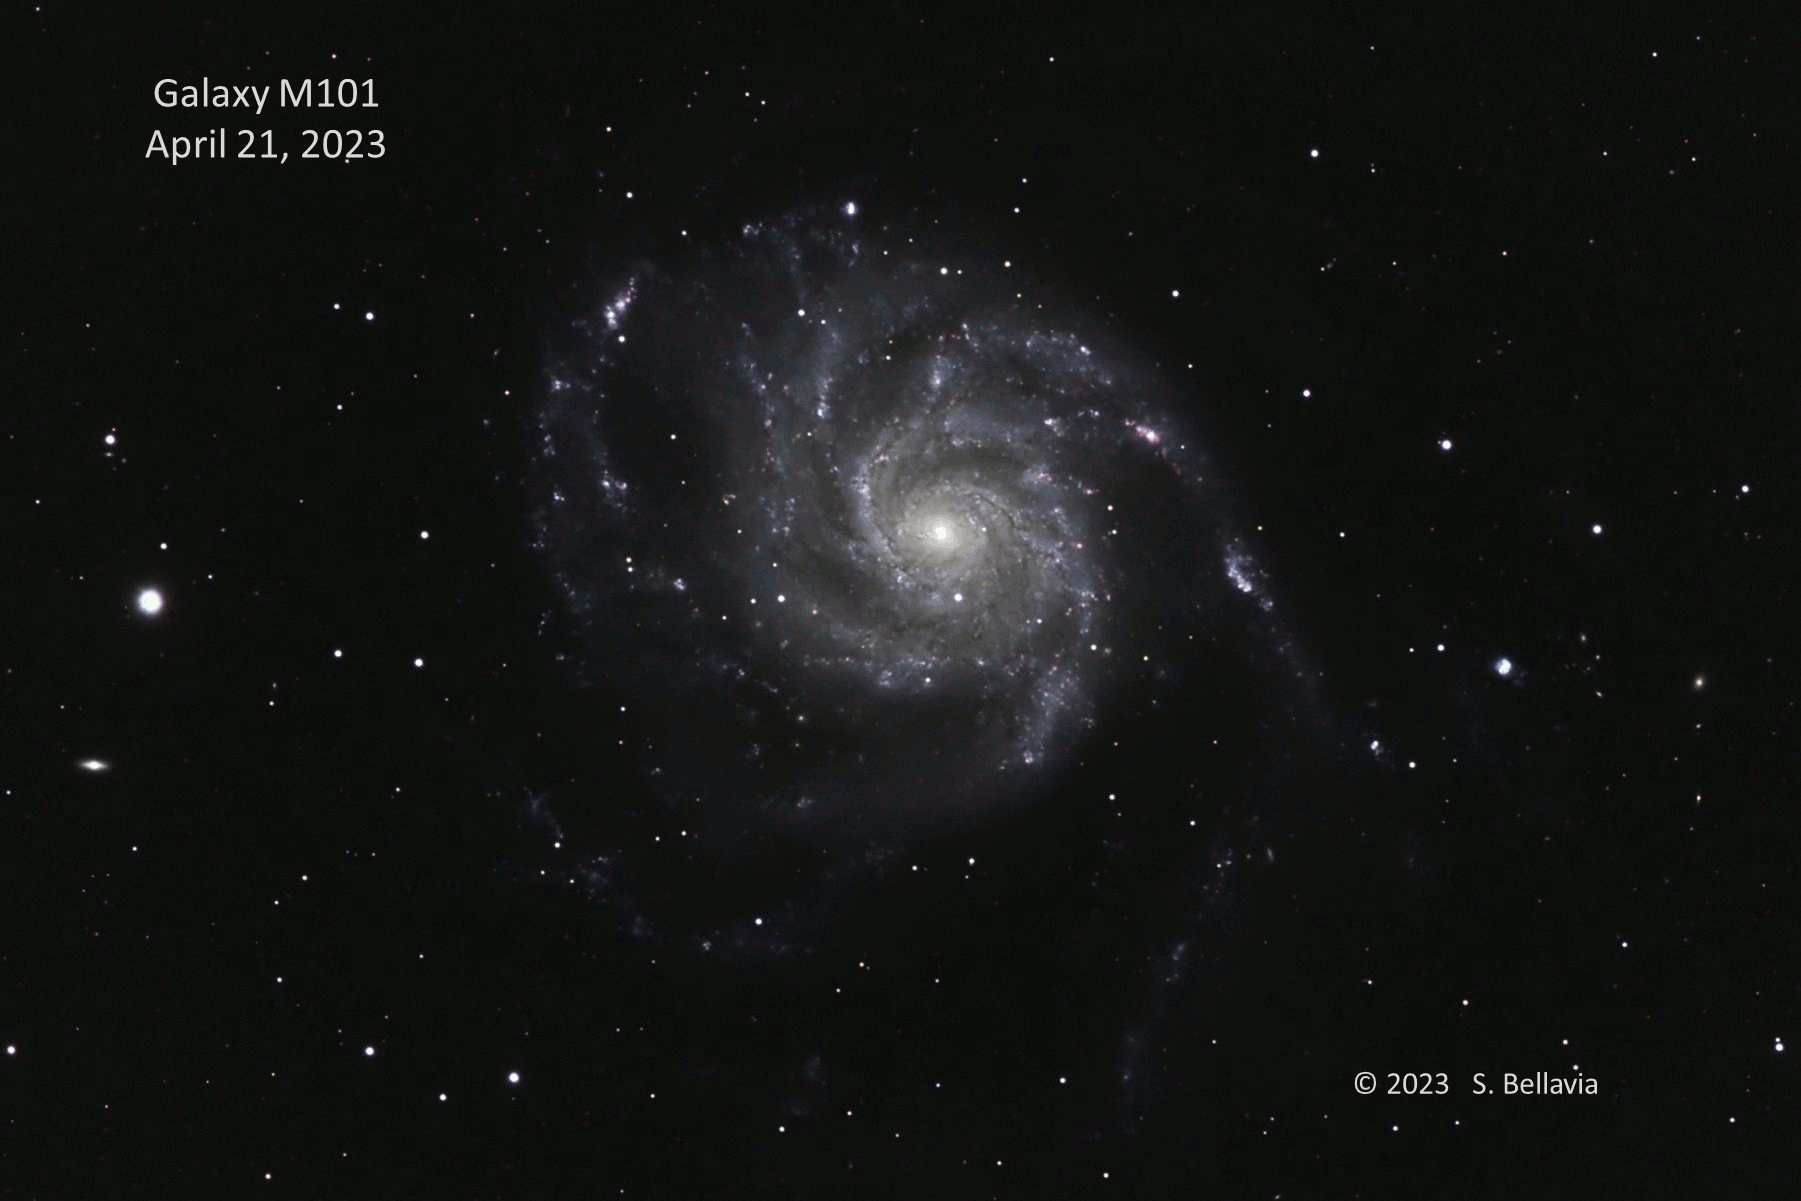 an animation showing a bright star appearing in a spiral galaxy